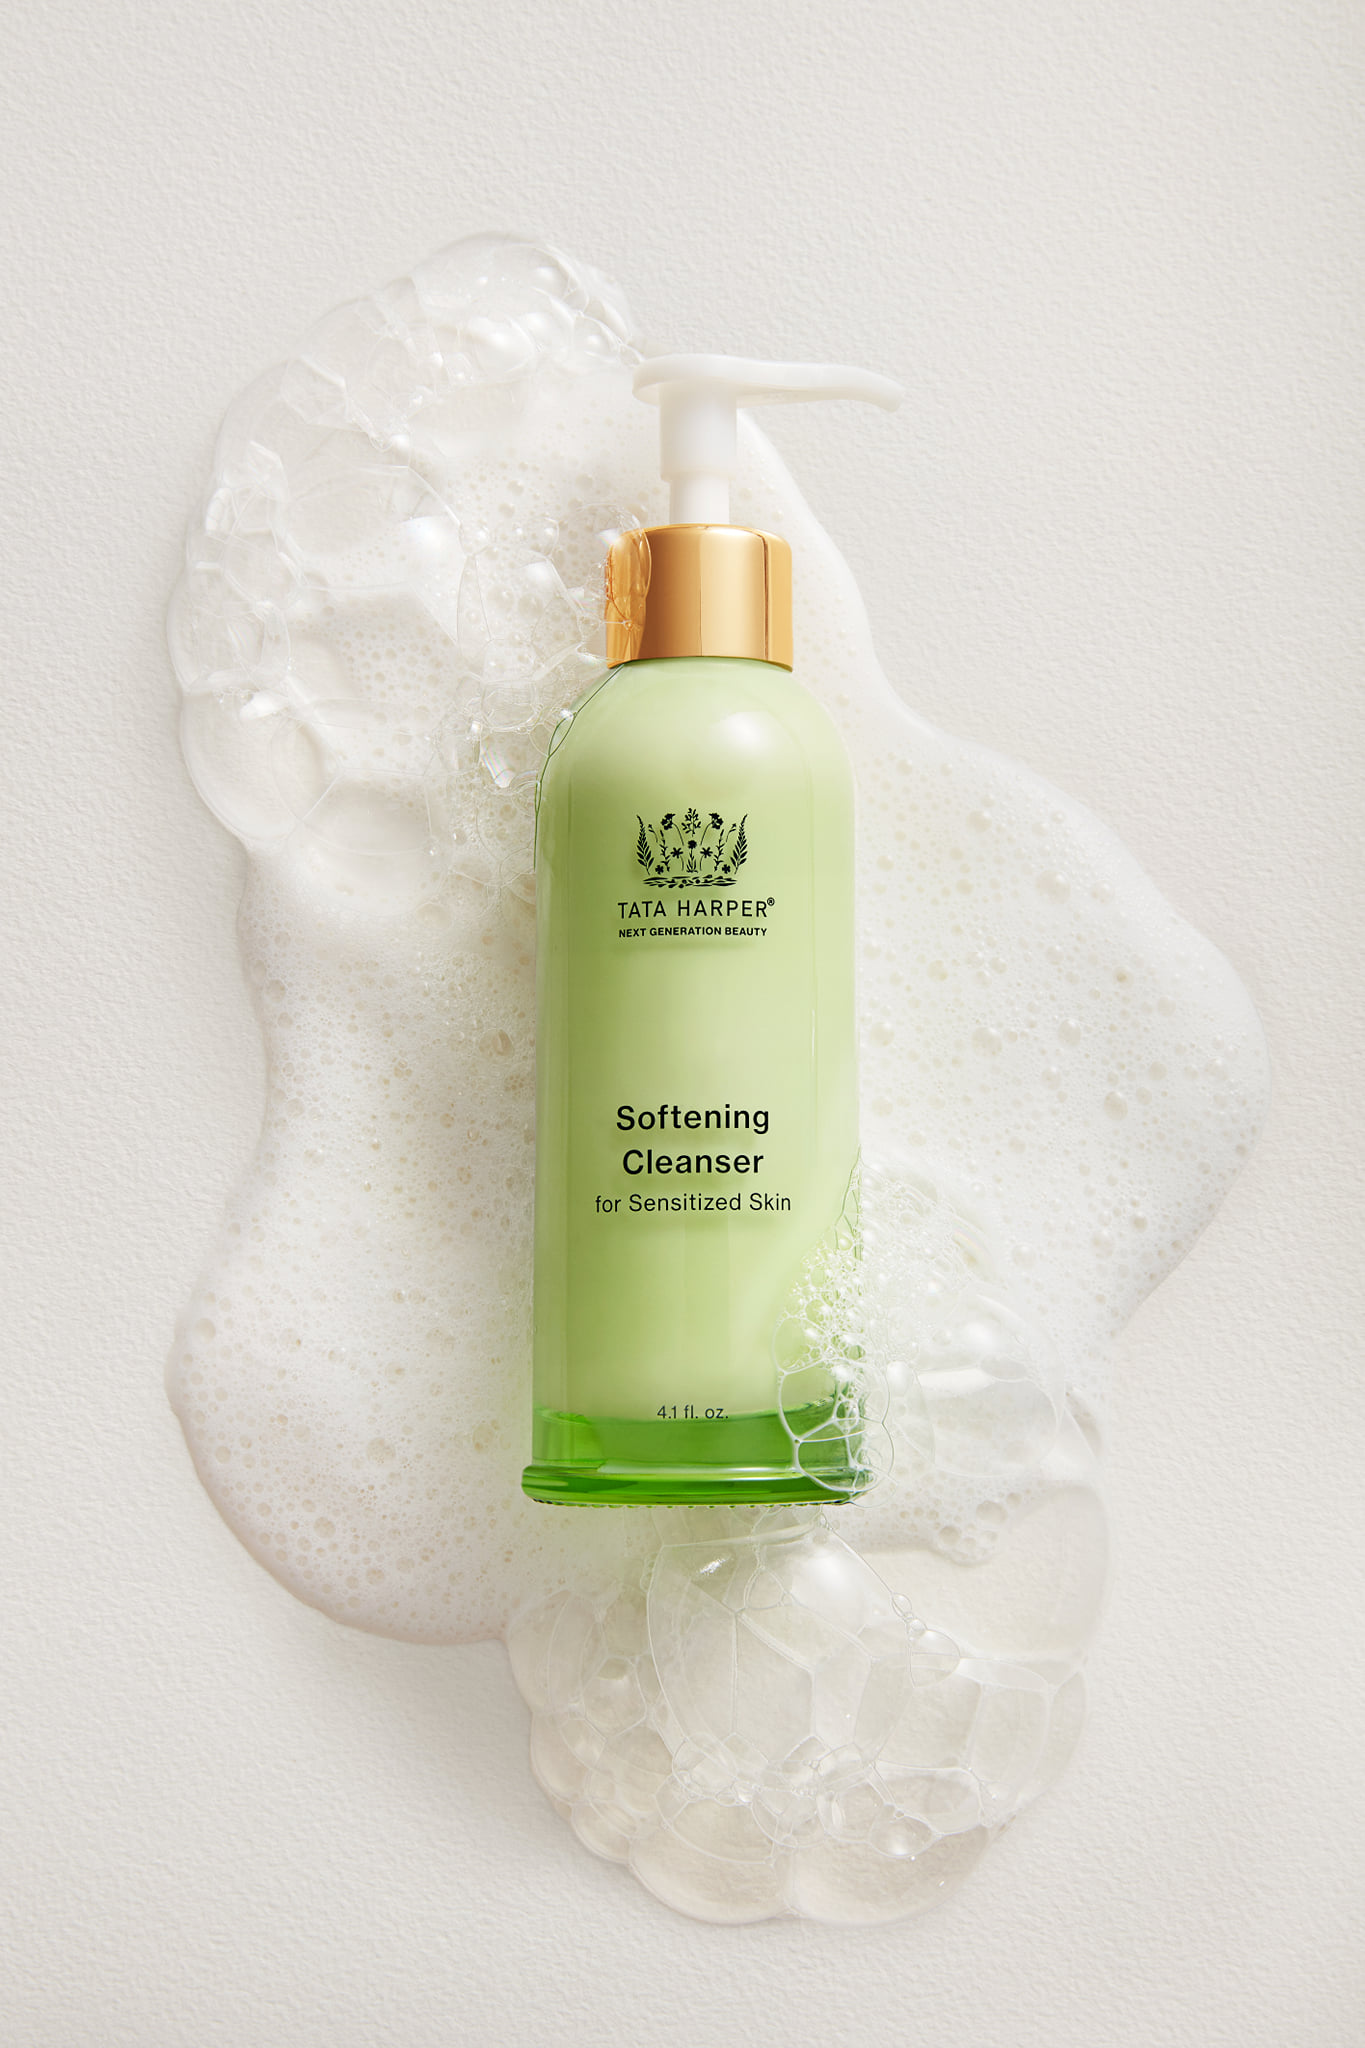 【The foamy caress】 The Softening Cleanser, from Tata Harper Skincare's Superkind collection, is infused with a micro-foaming botanical blend that lathers into a dense, luxurious foam to gently dissolve buildup and impurities, giving reactive skin the much-needed foamy caress and leaving behind a thin lipid barrier to make your skin feeling clean and supple